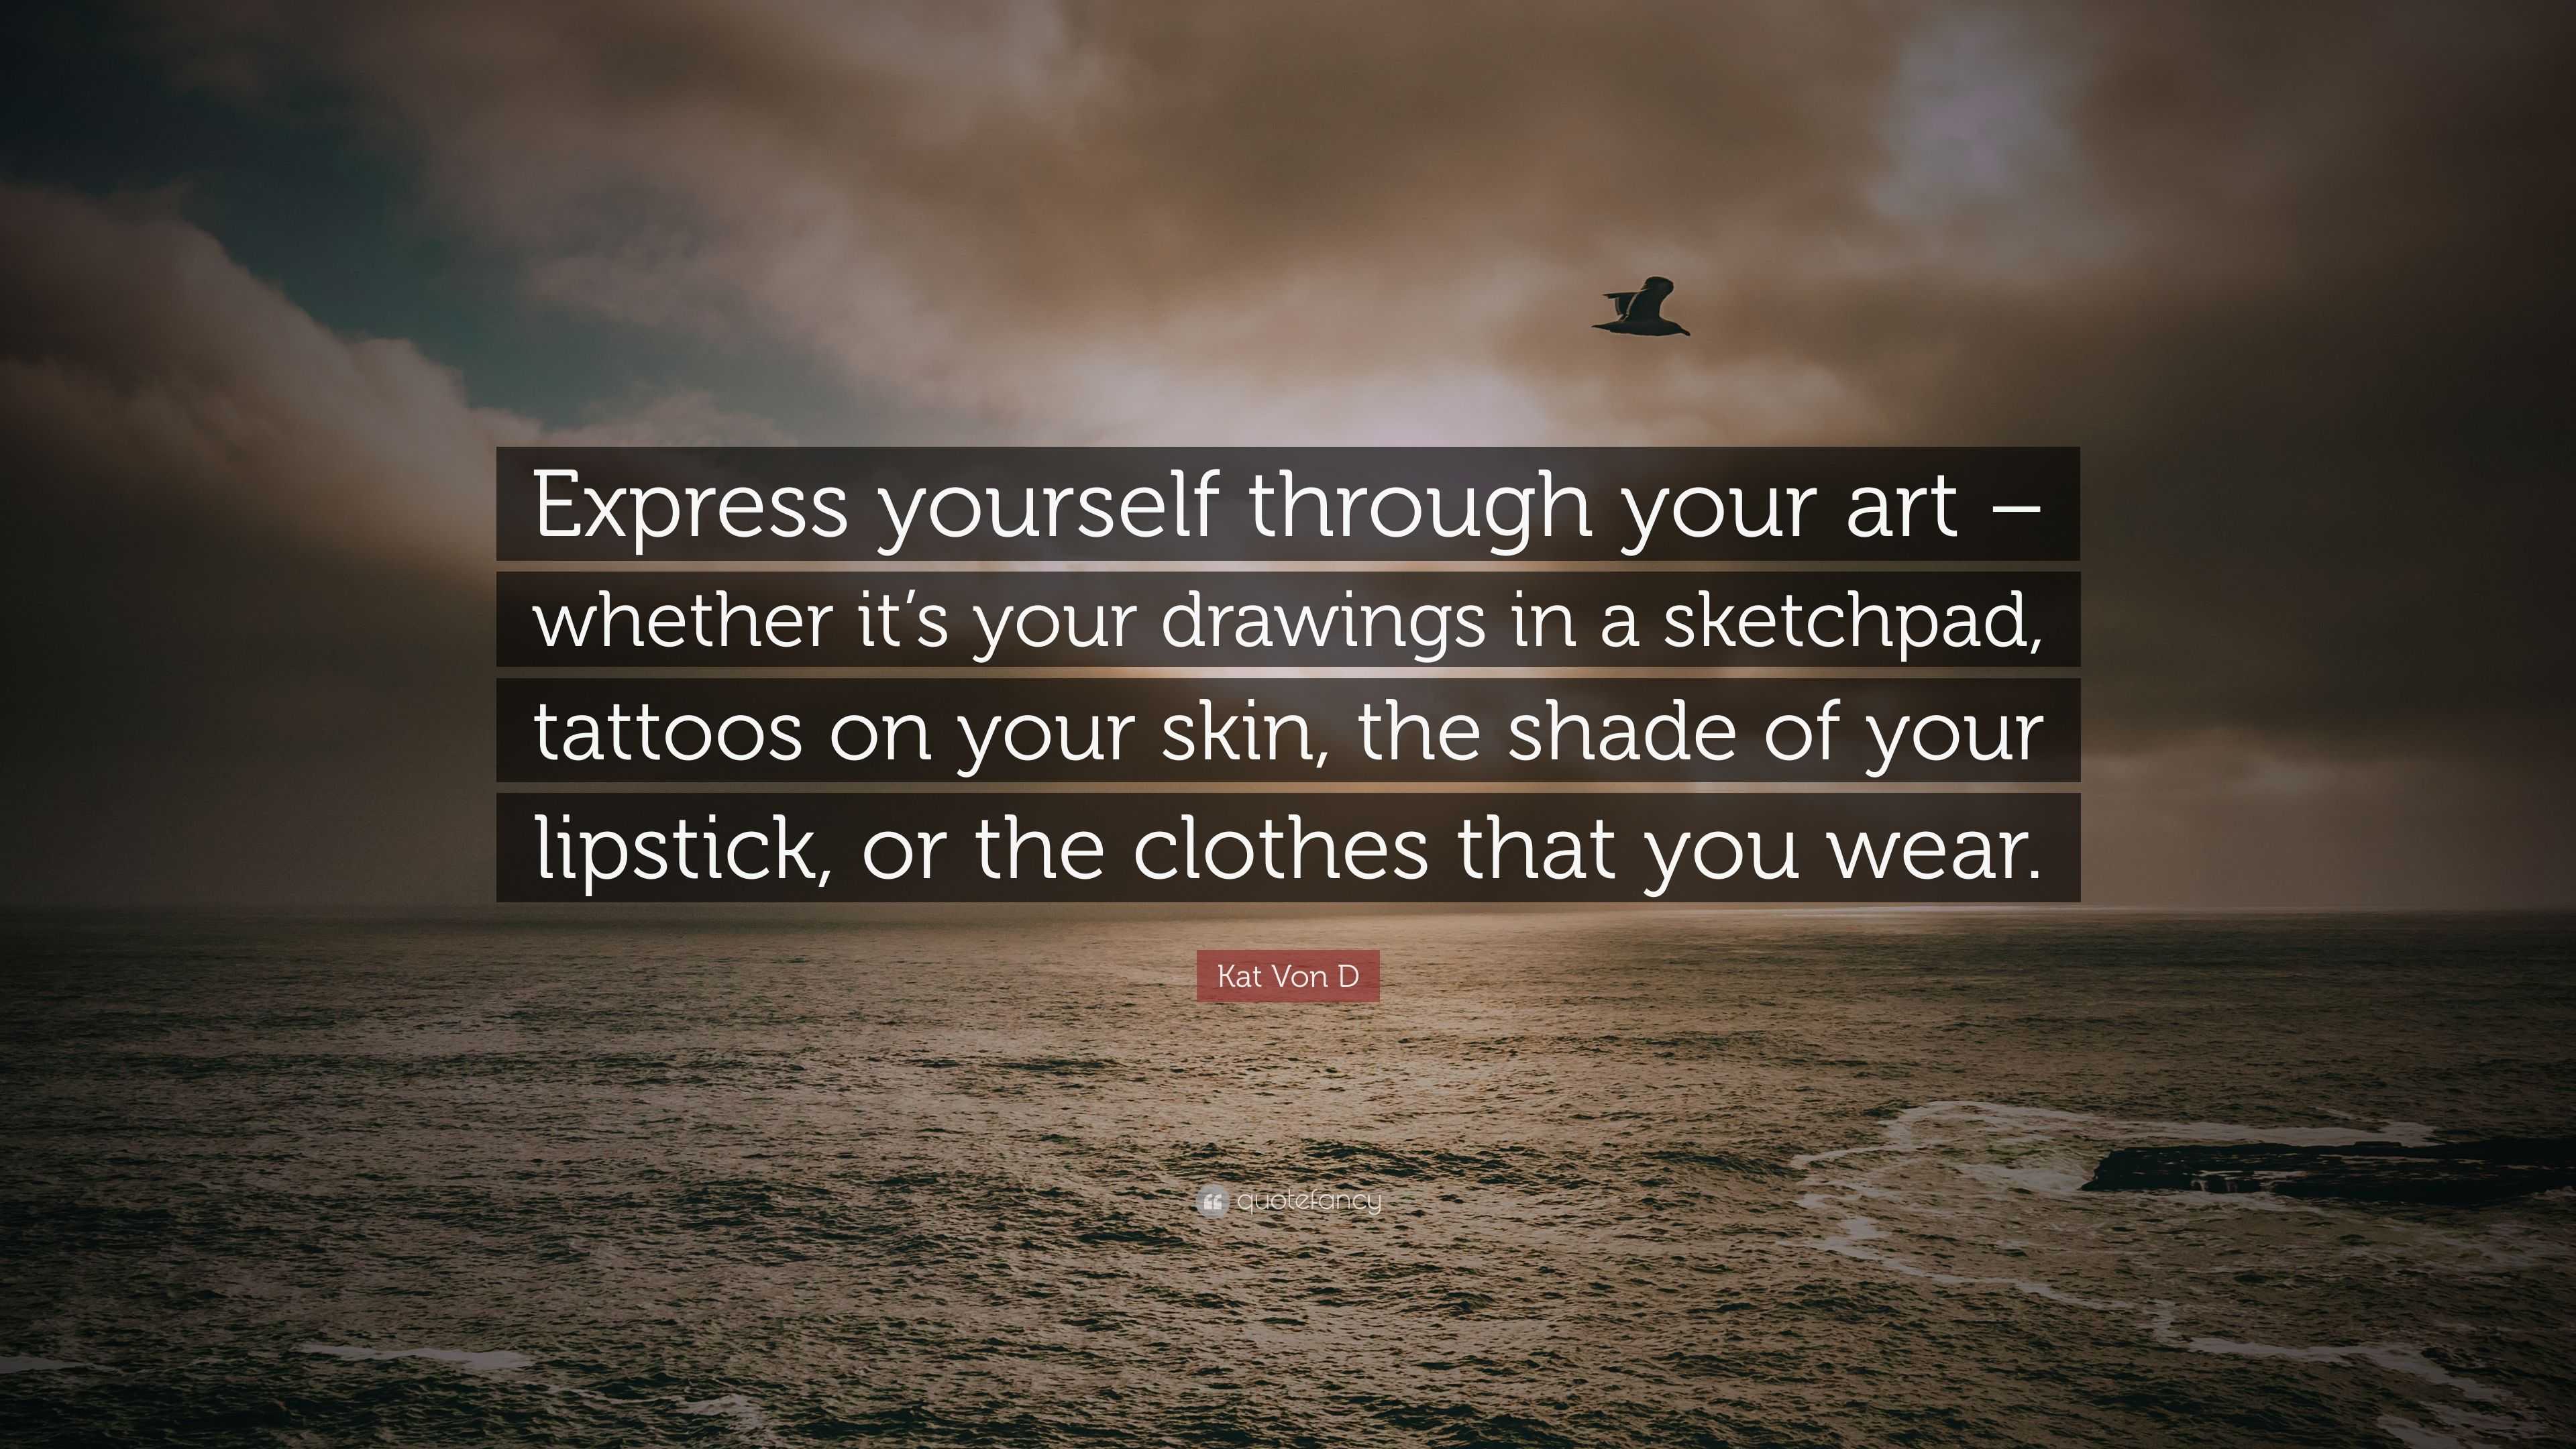 Kat Von D Quote: “Express yourself through your art – whether it’s your